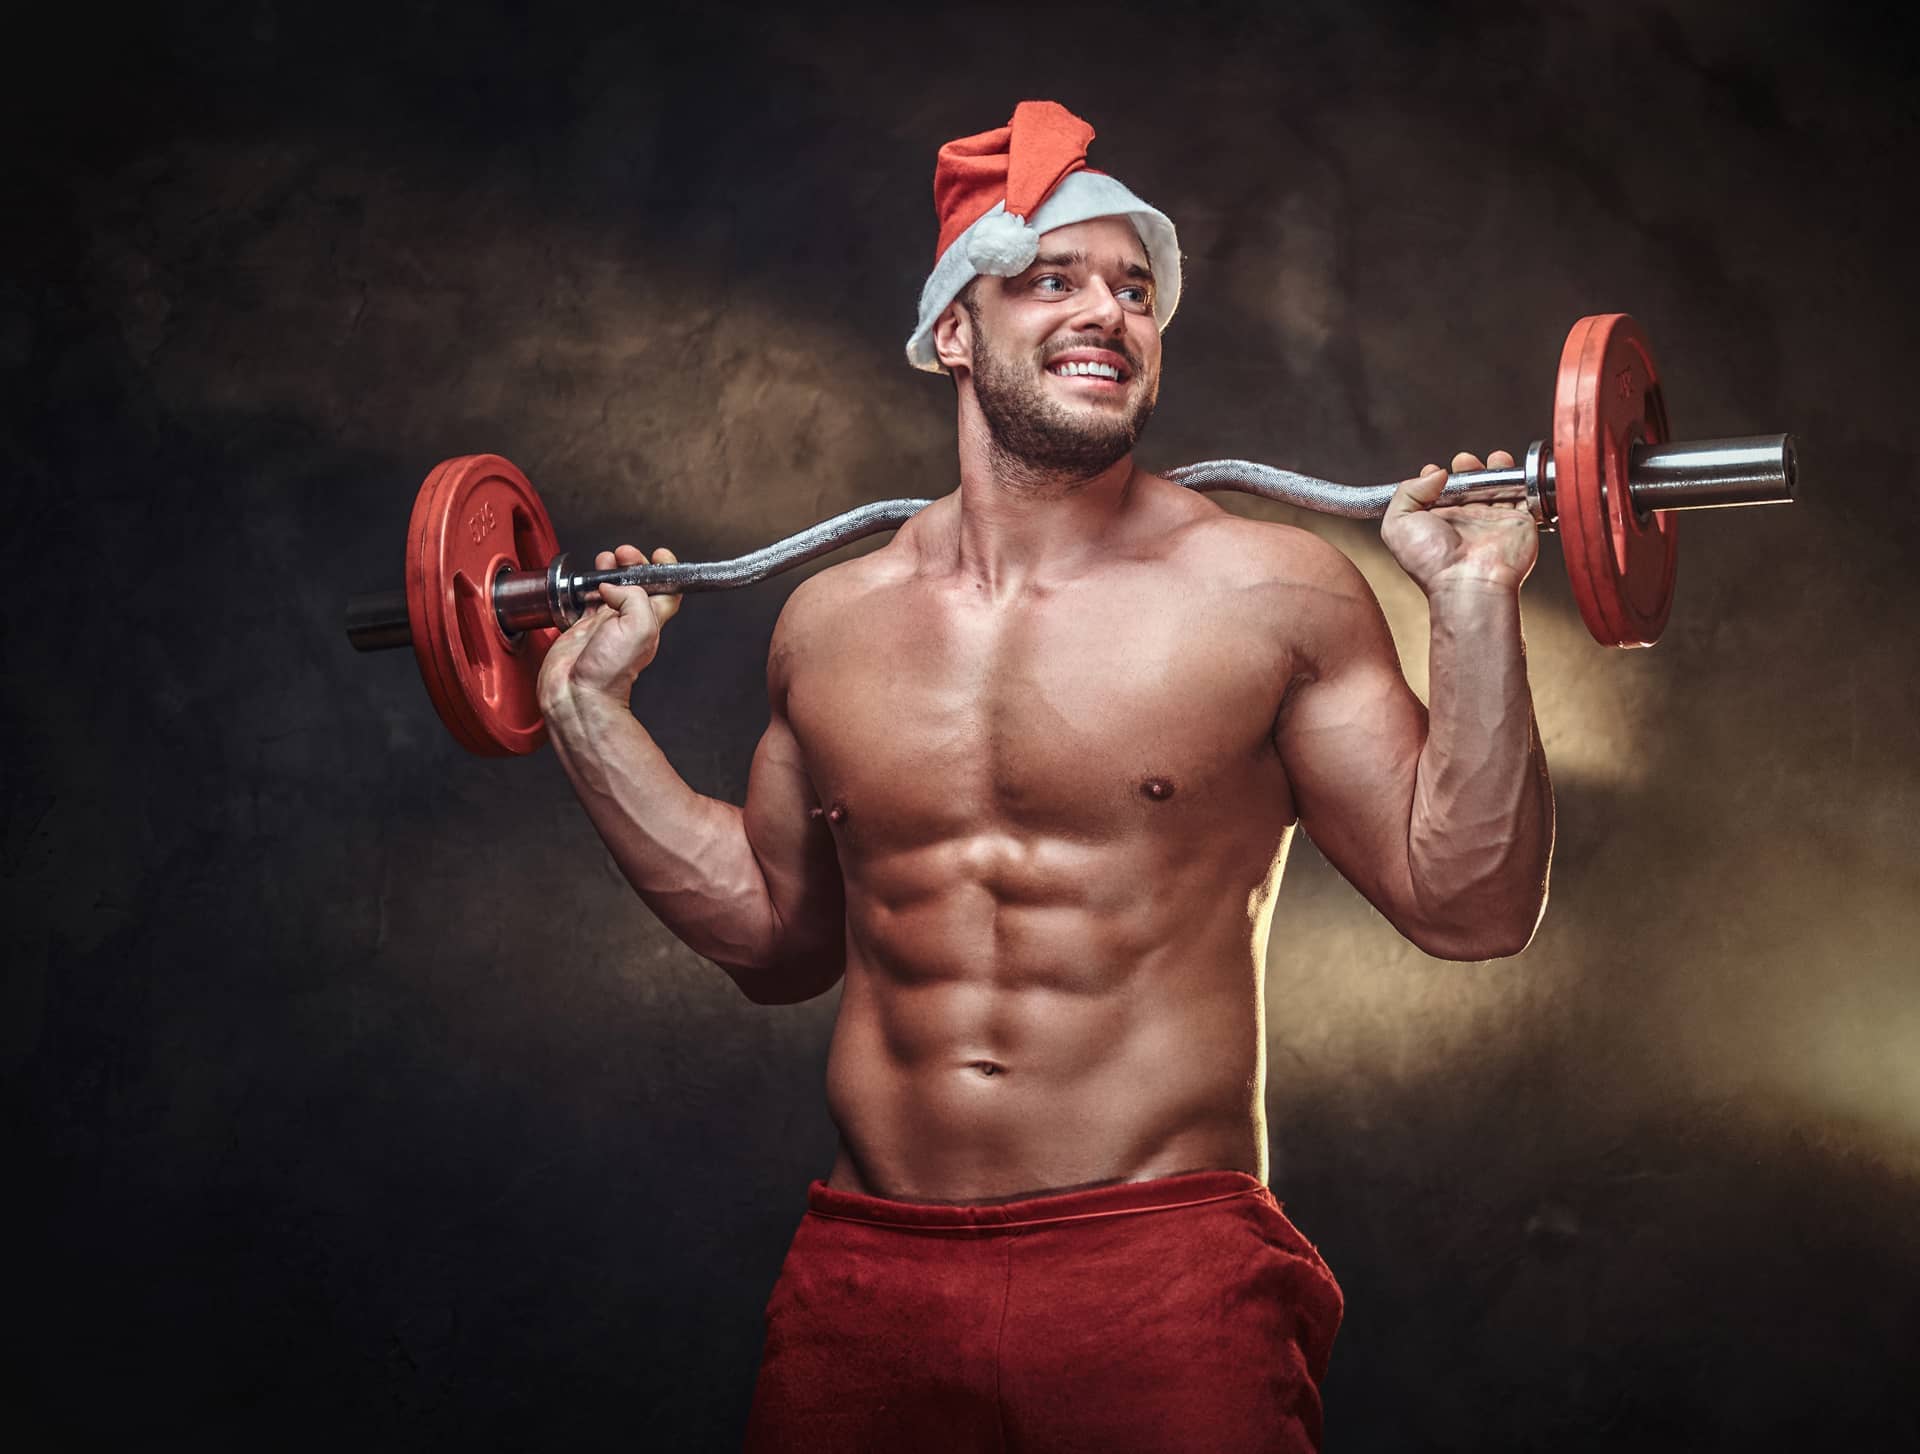 Fit man is holding barbell while posing photographer christmas time